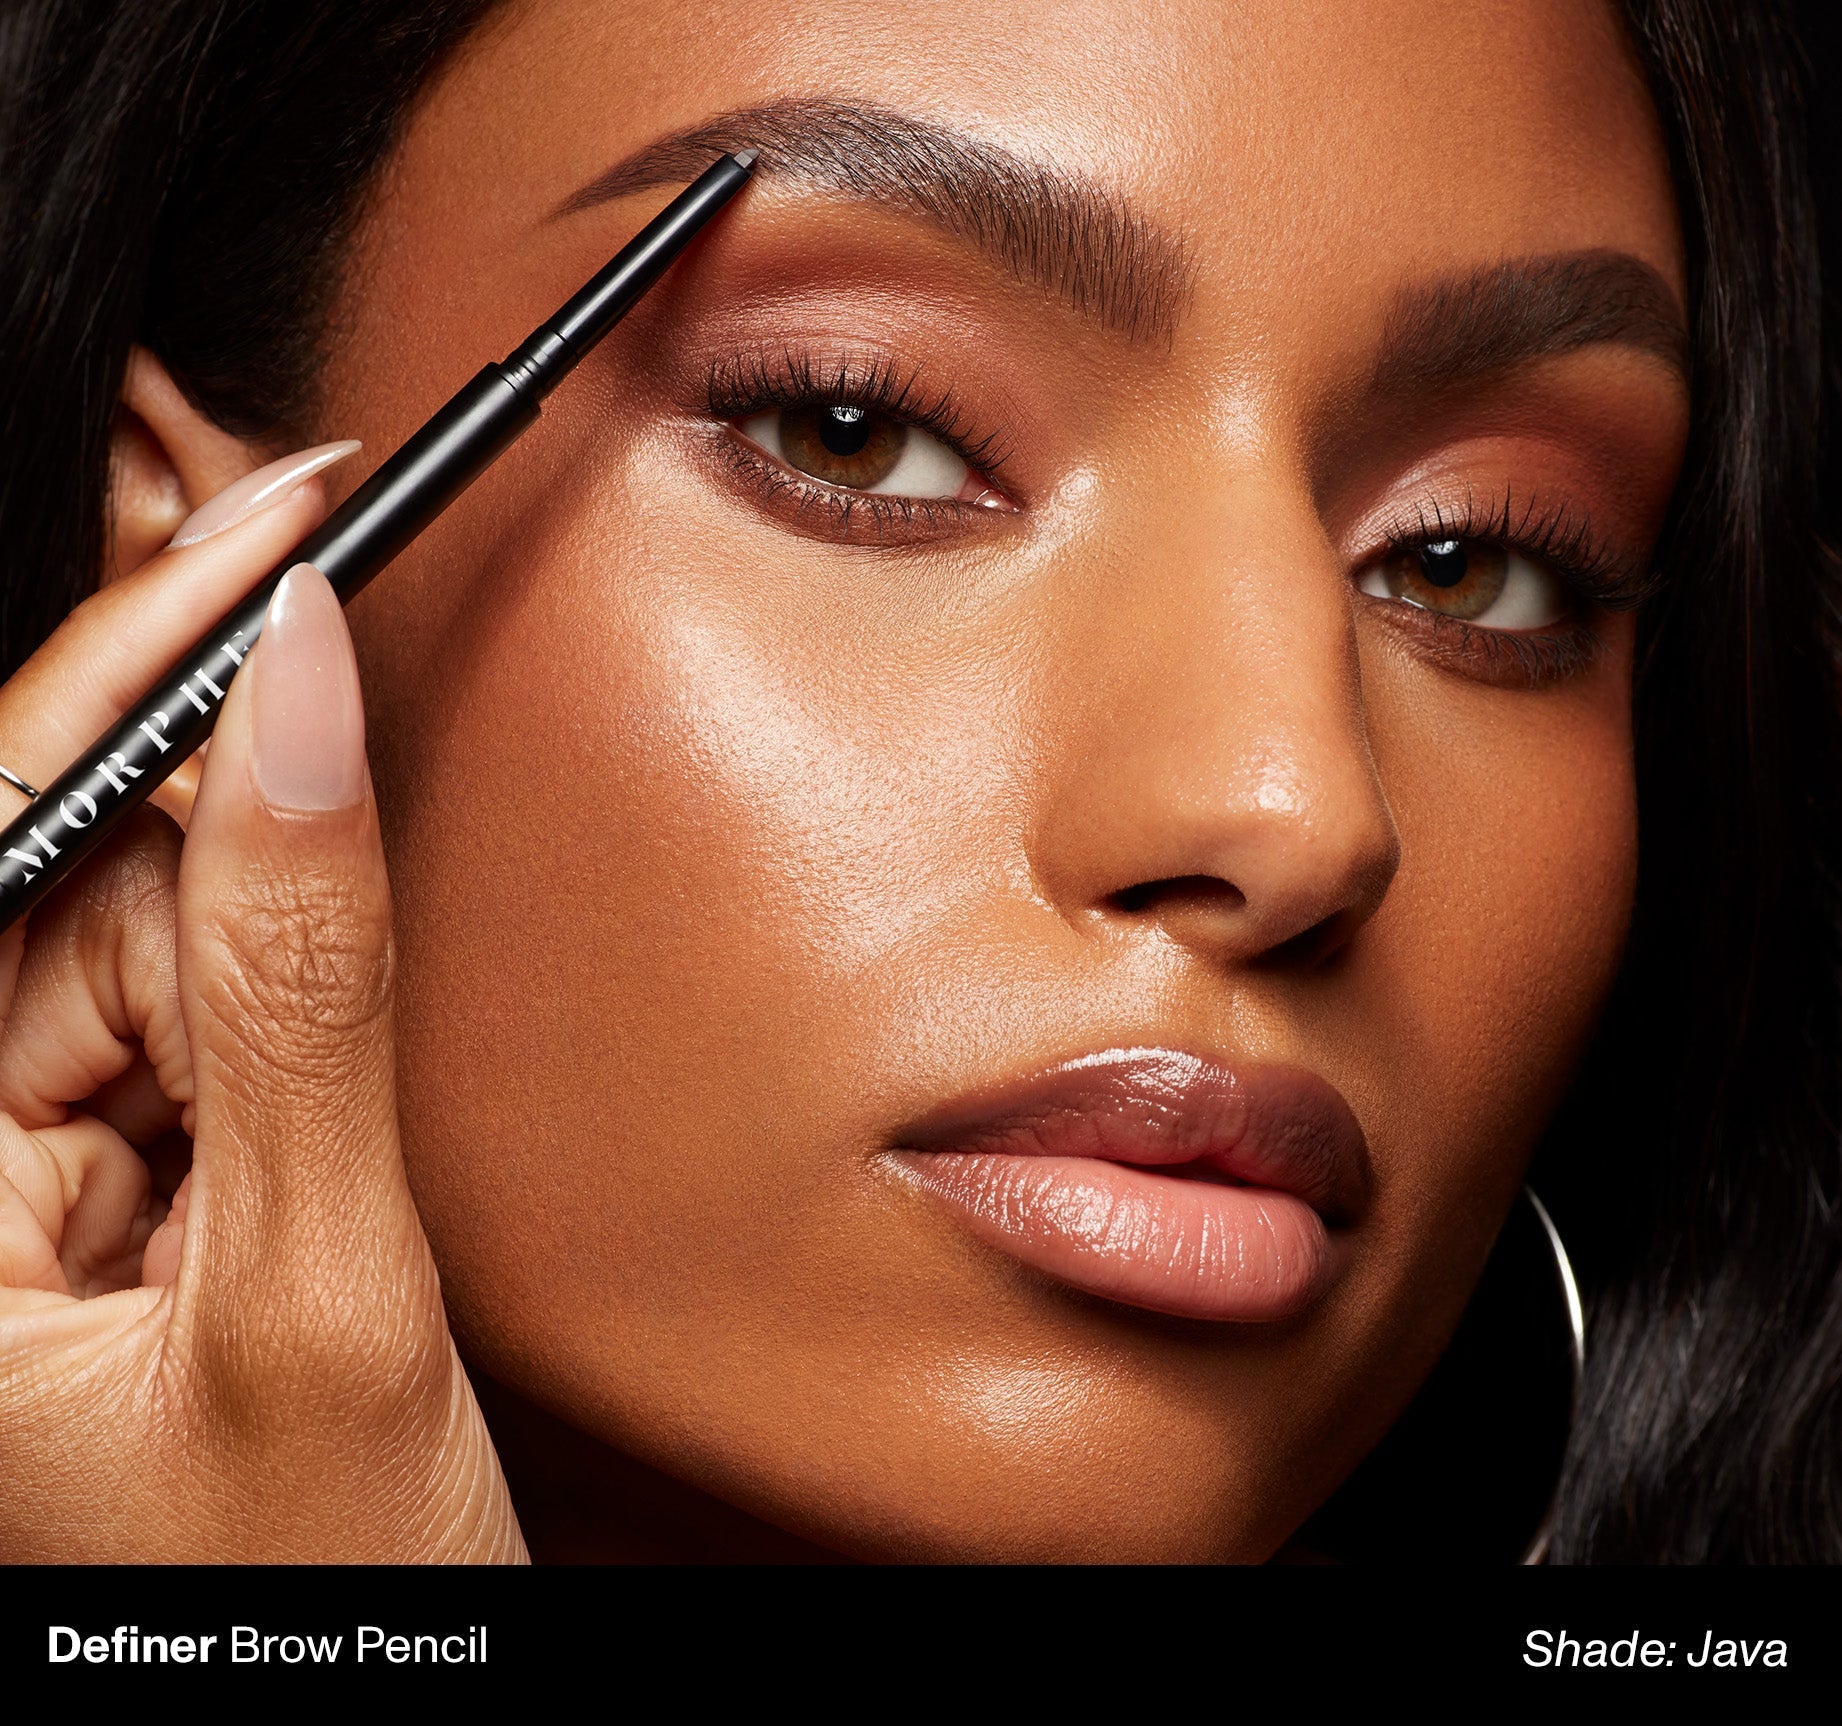 Definer Dual-Ended Brow Pencil & Spoolie - Cold Brew - Image 7